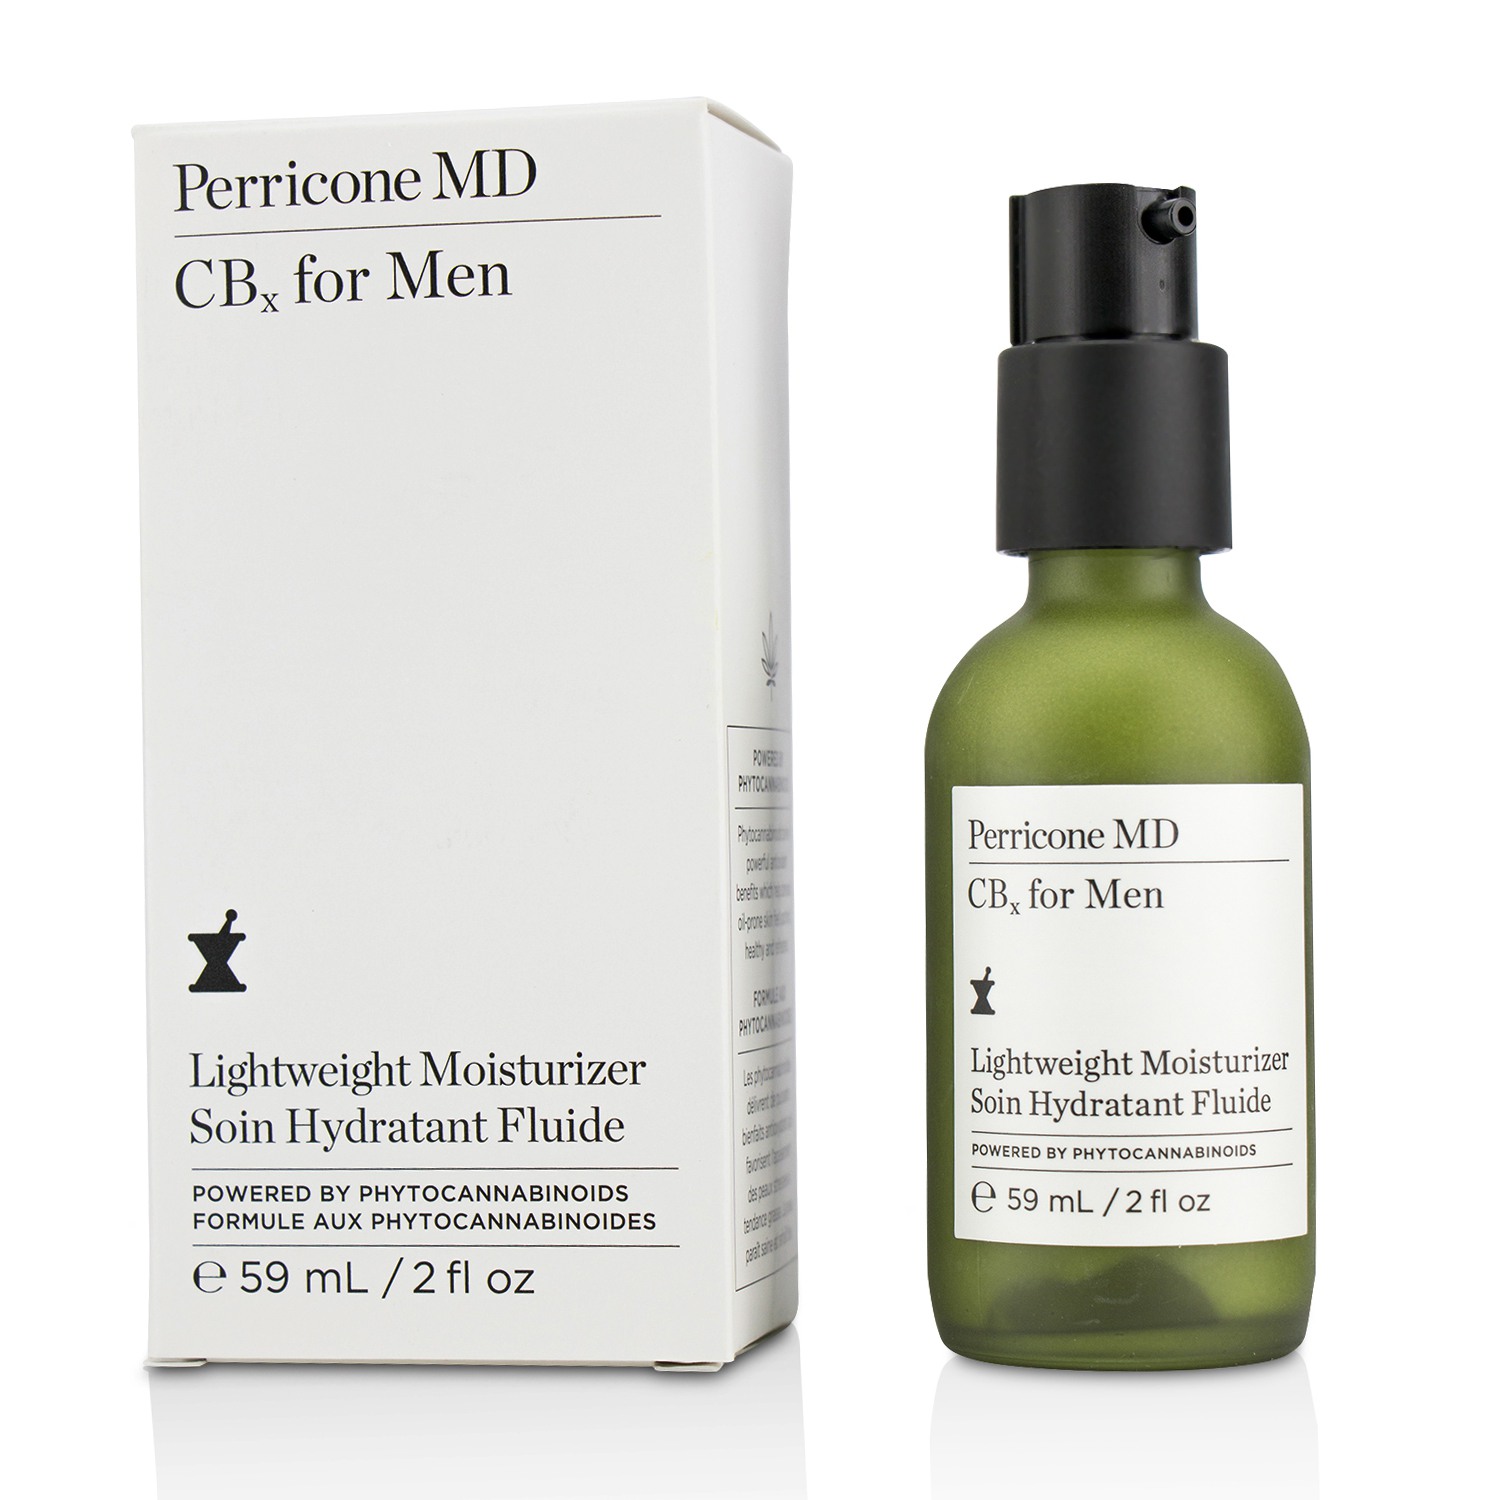 CBx For Men Lightweight Moisturizer Perricone MD Image